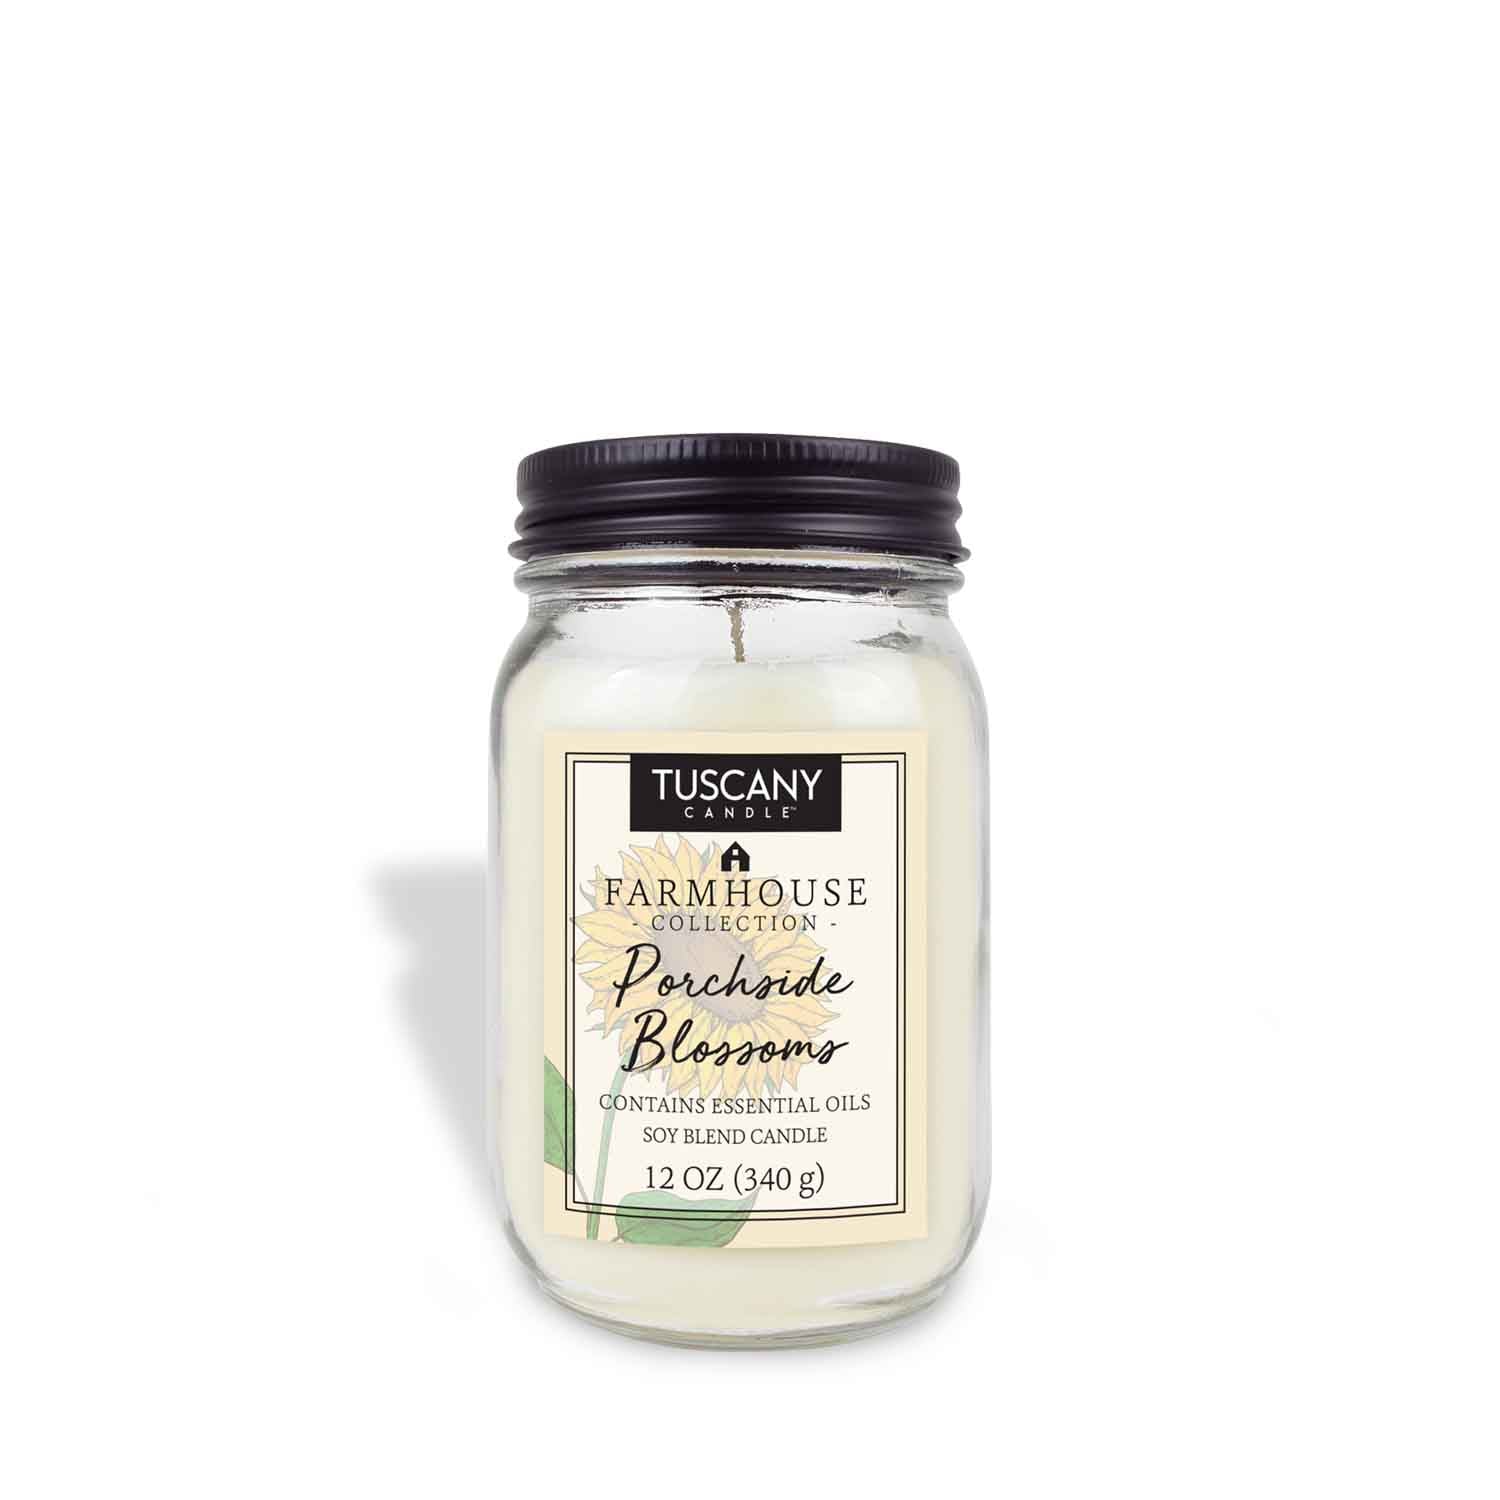 An enchanting Porchside Blossoms Scented Jar Candle (12 oz) - Farmhouse Collection from Tuscany Candle® EVD, radiating cozy warmth against its serene white background.